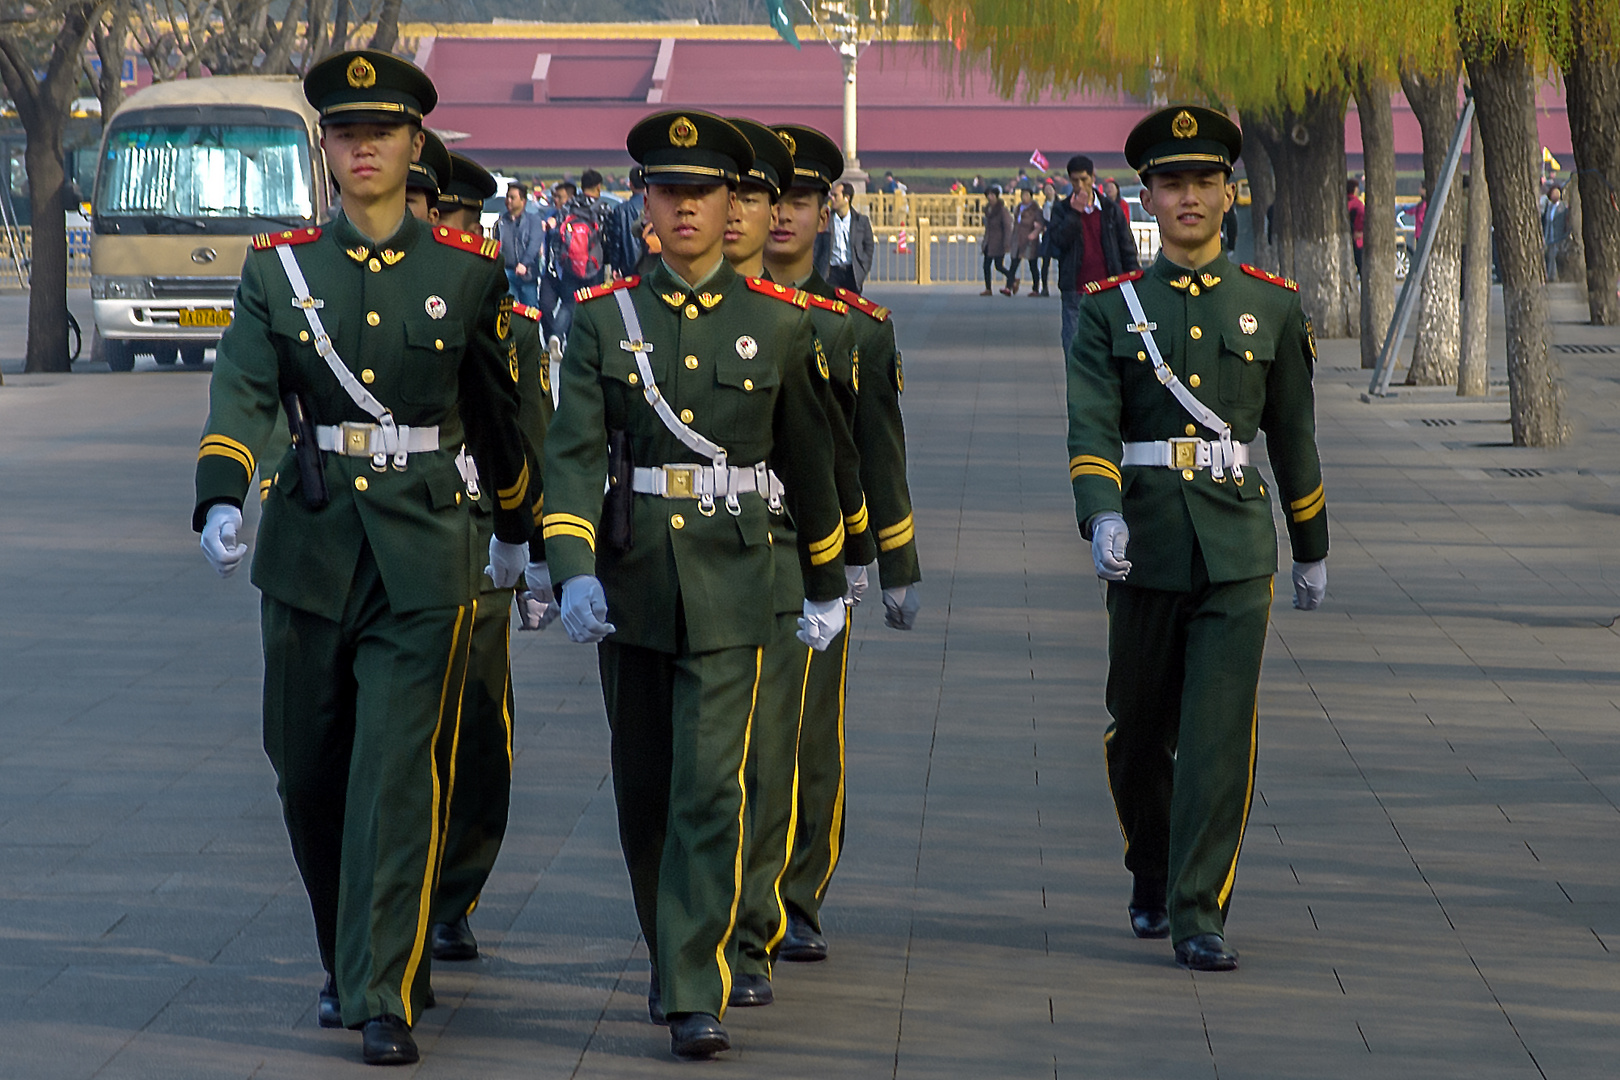 March of guards at Tian'anmen Square